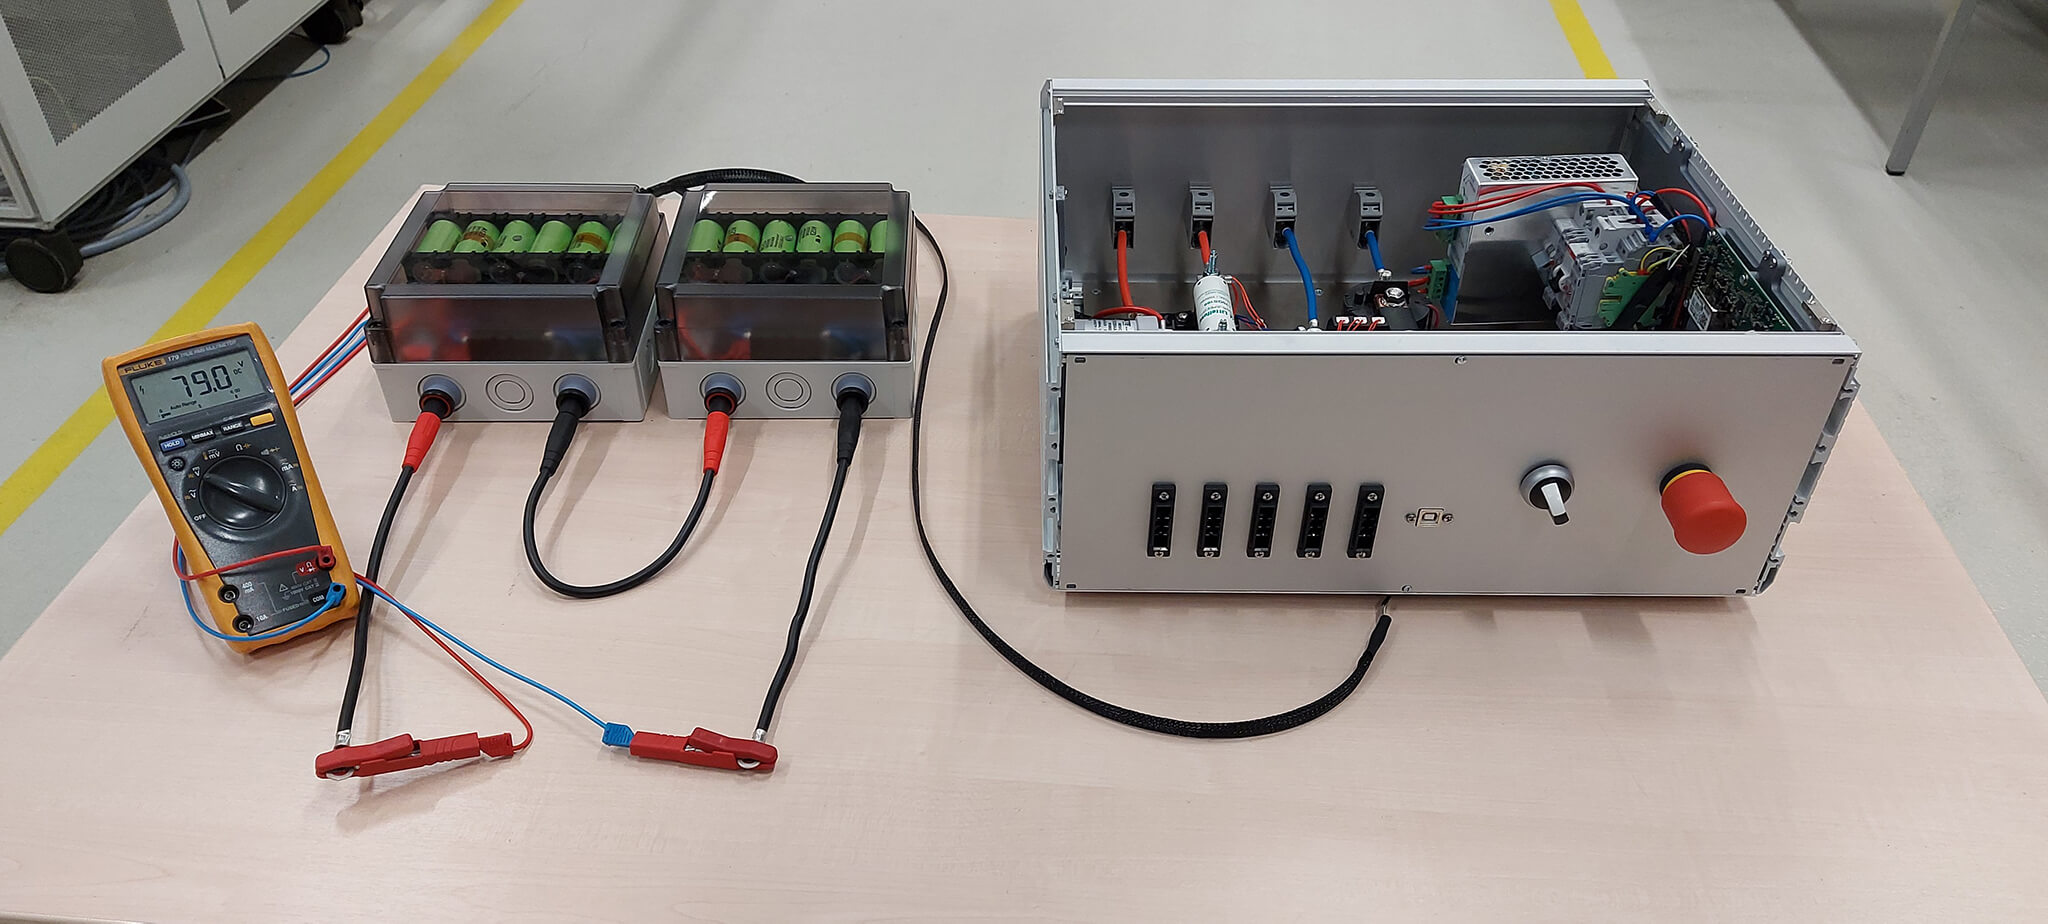 Battery system consisting of two battery modules and a switch box